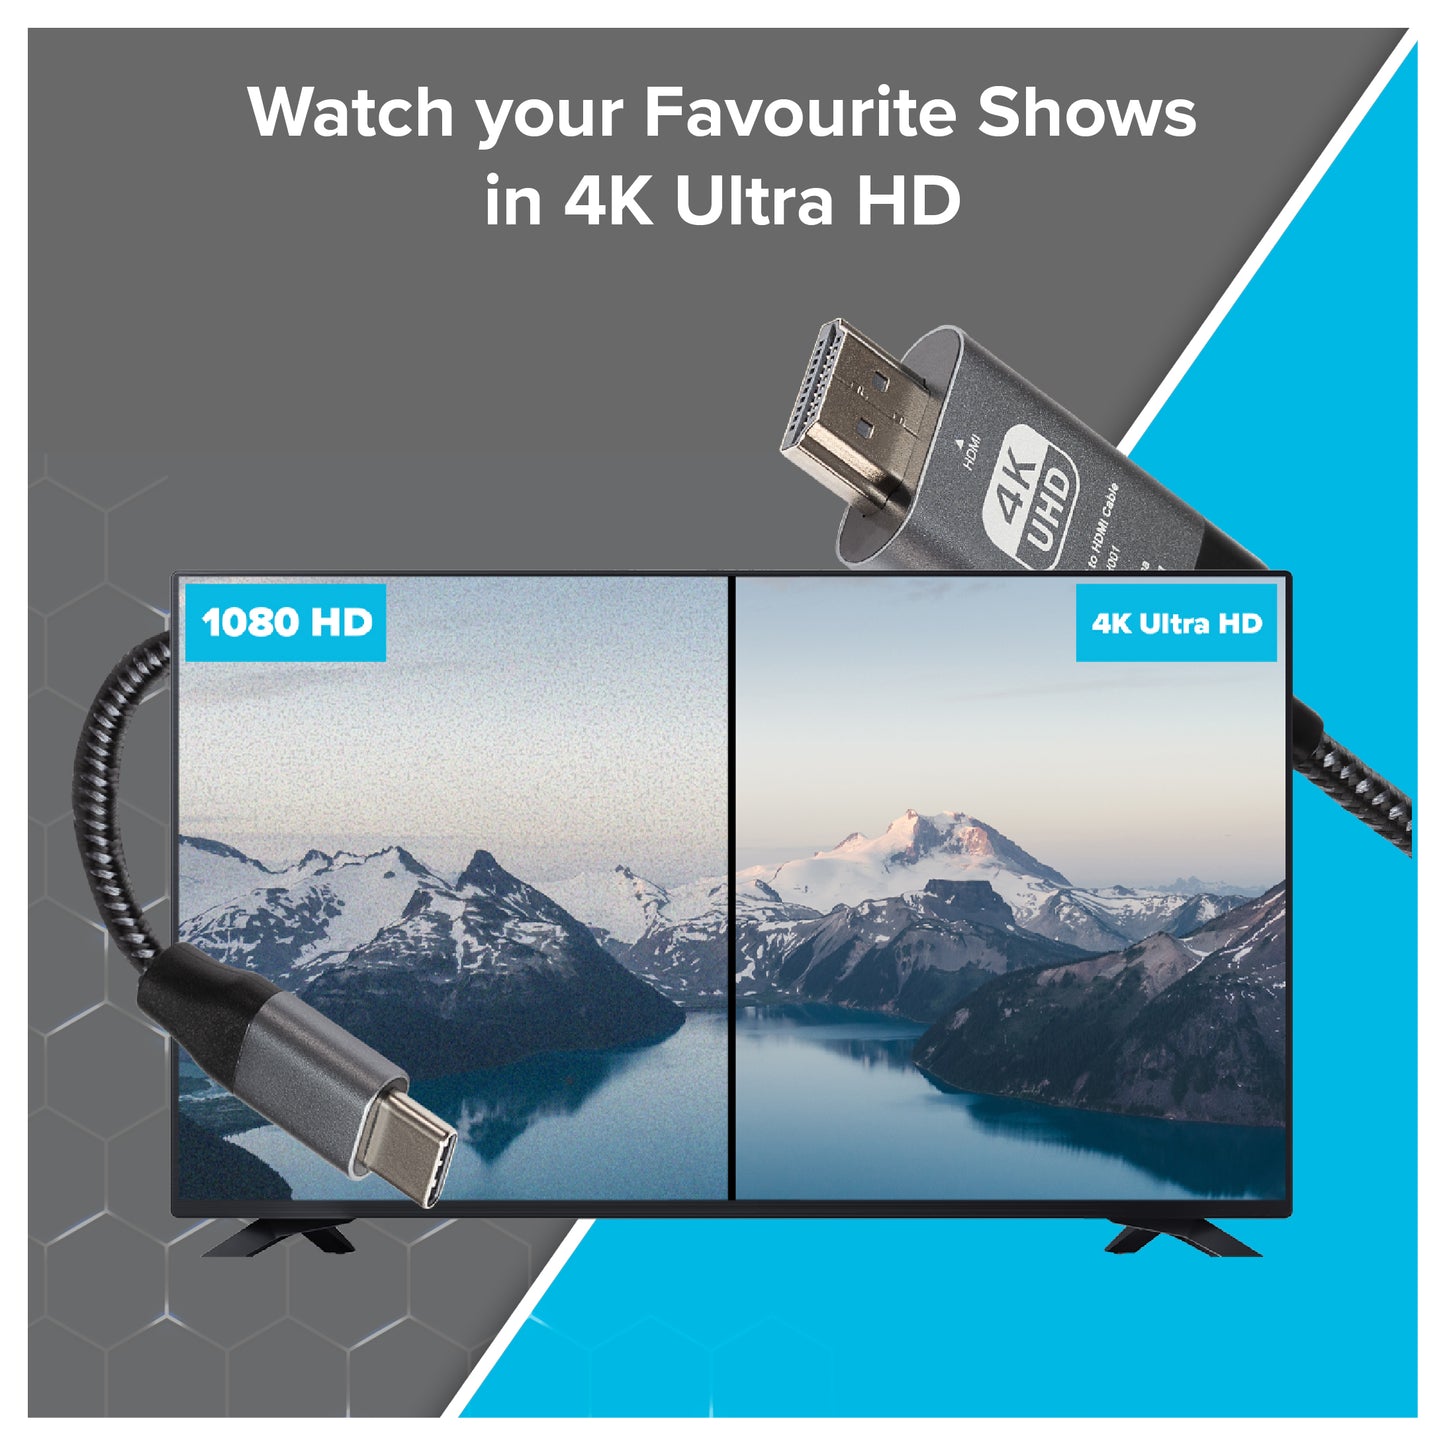 Maplin USB-C to HDMI Cable Adapter (Supports 4K Ultra HD @ 60Hz) - Black - maplin.co.uk